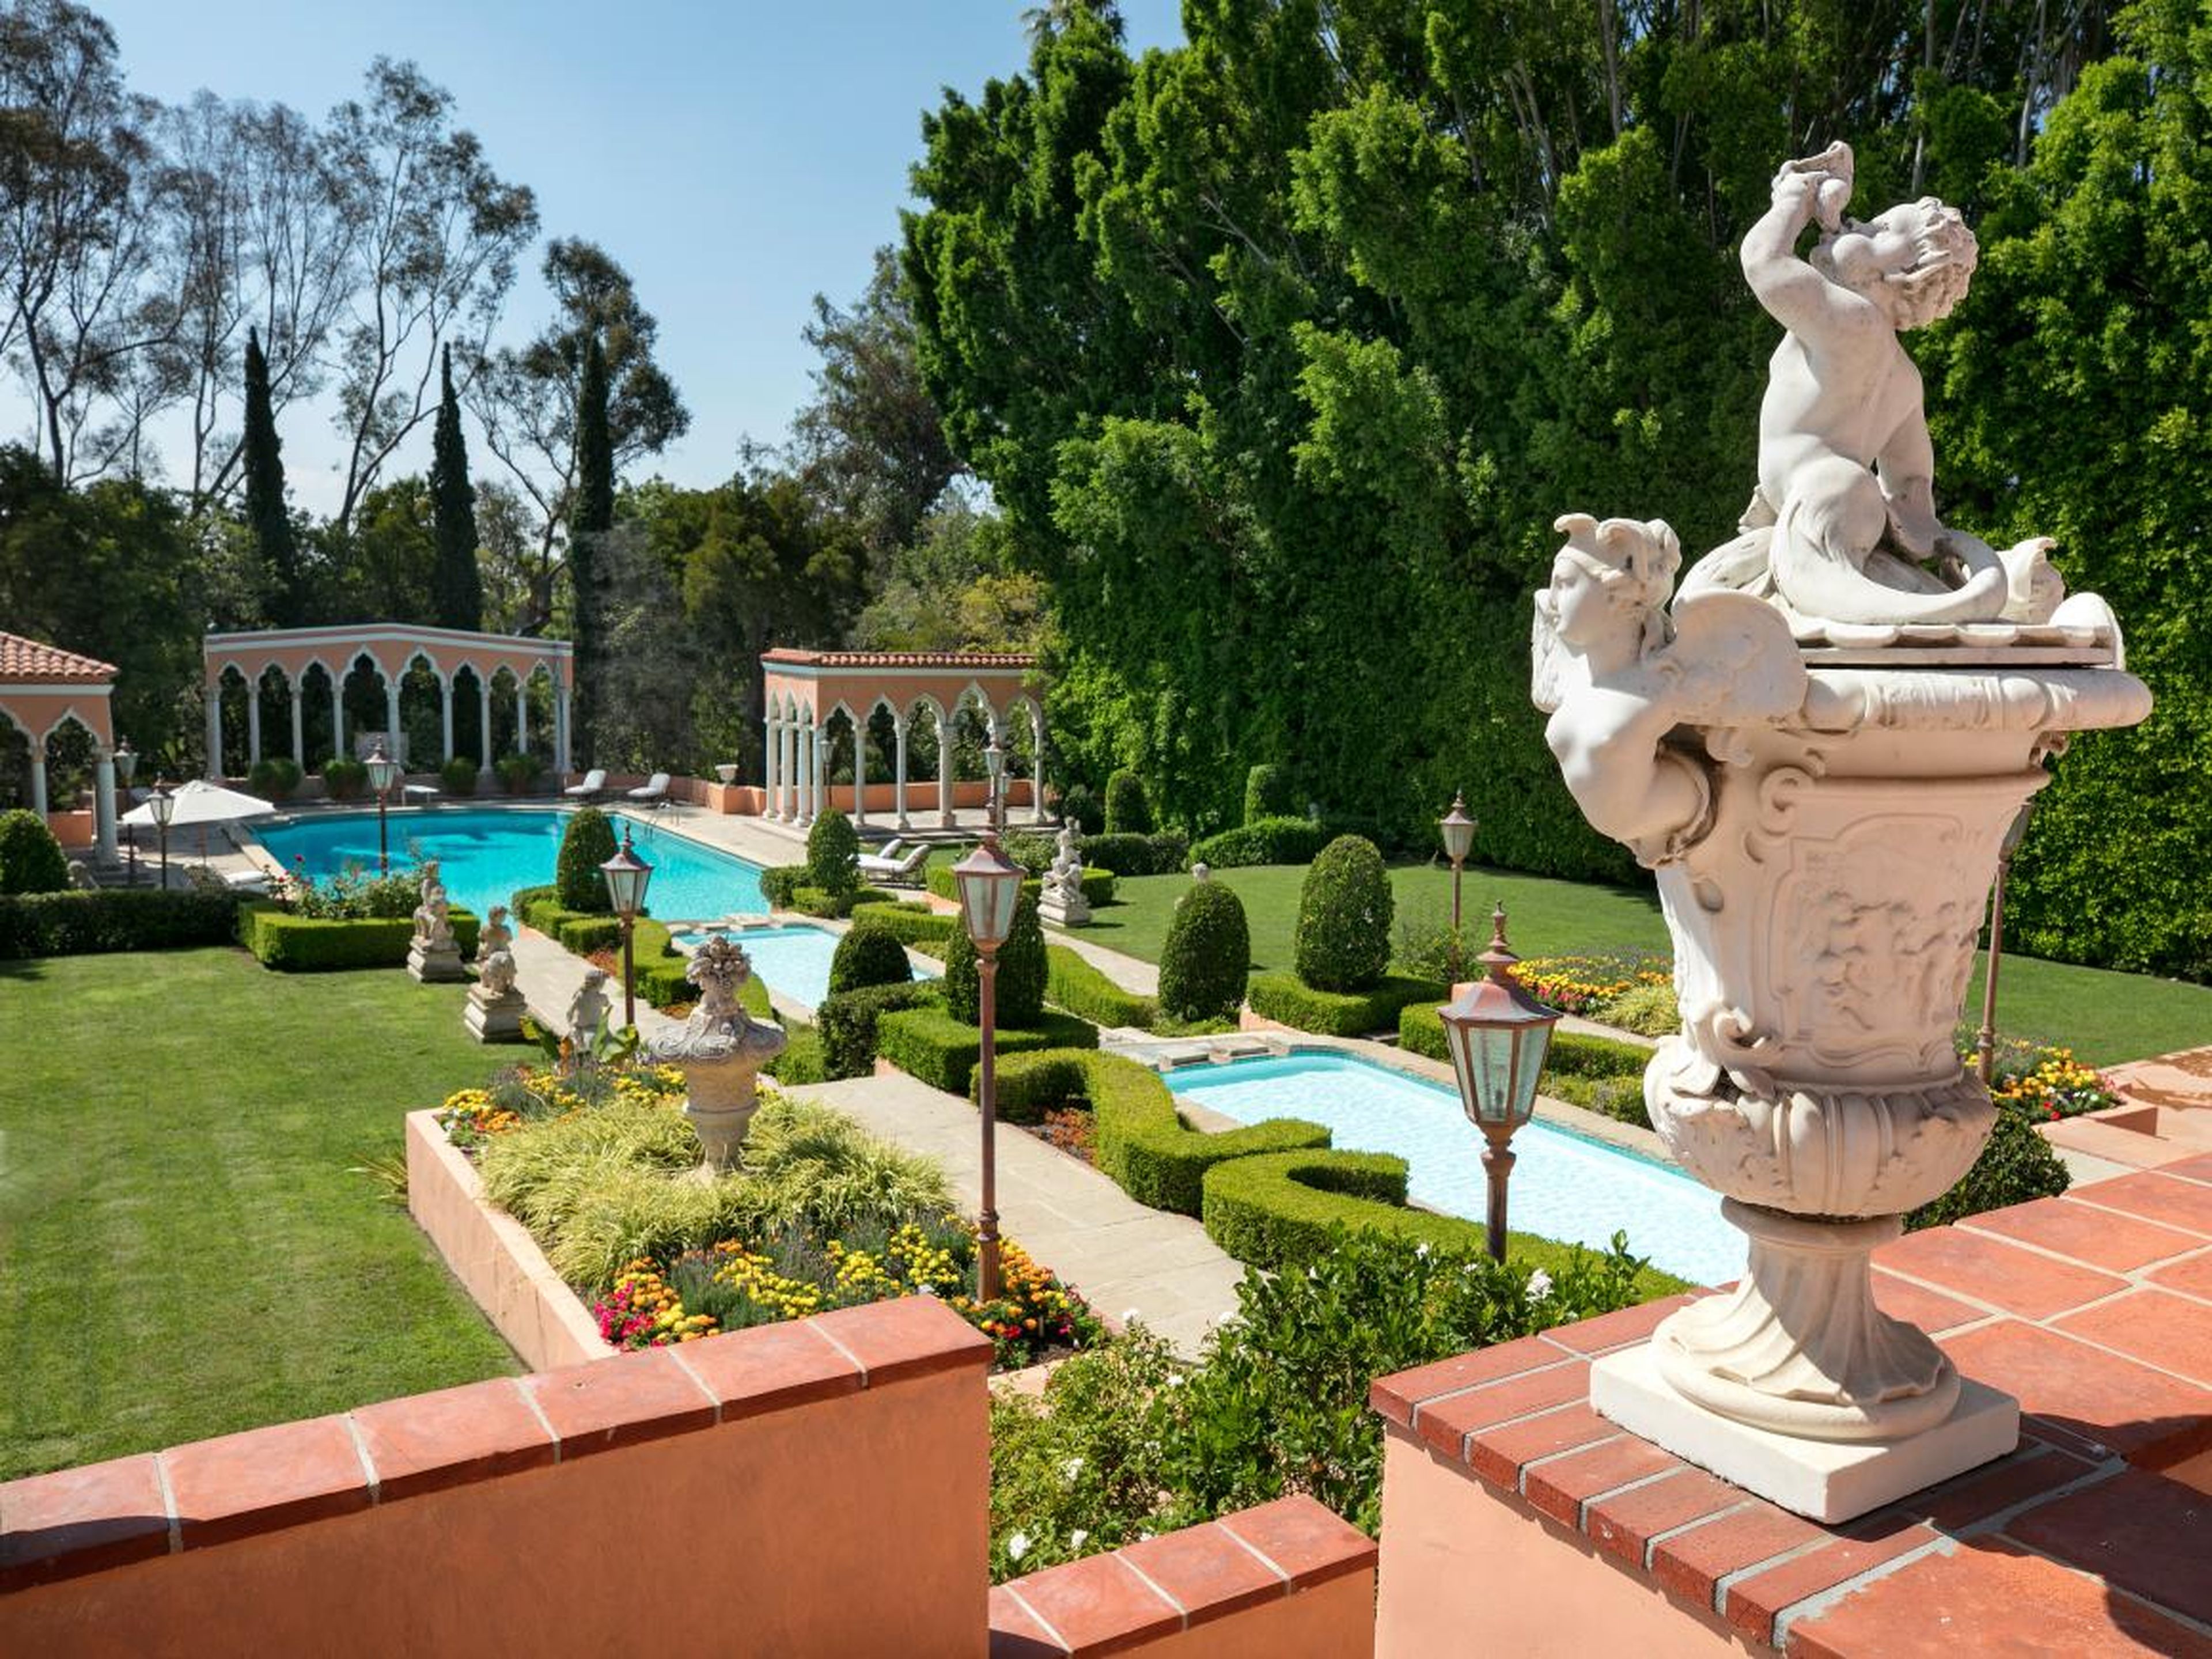 One real estate website called the Beverly House a "quintessential emblem of Hollywood’s Golden Era."